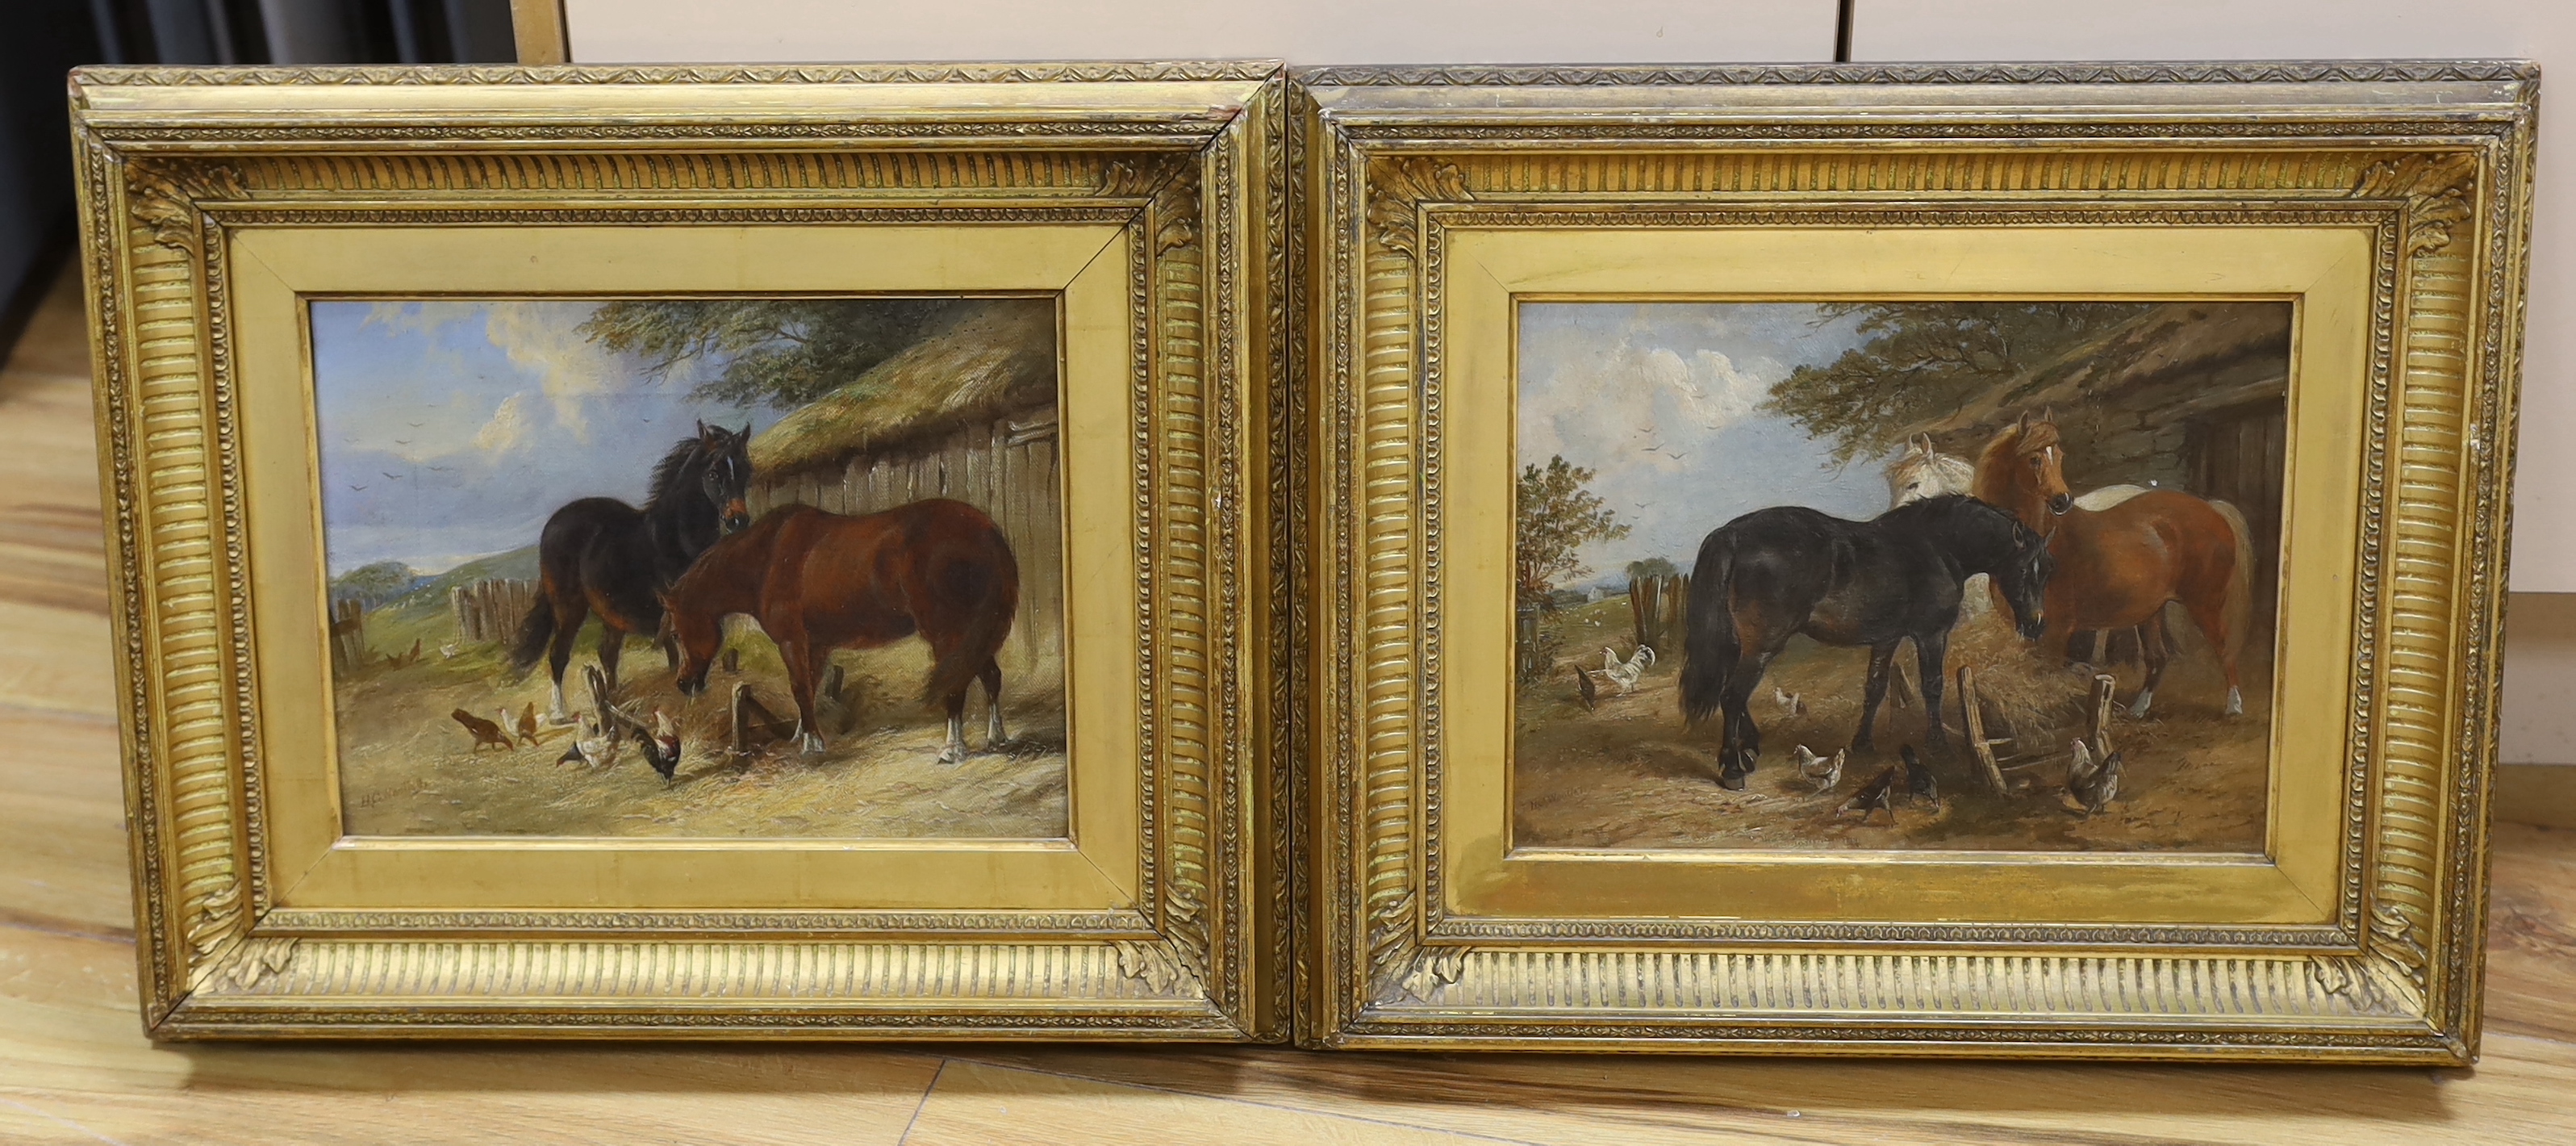 Henry Charles Woollett (1826 - 1893) pair of oils on canvas, Farmyard scenes with horses and chickens, signed, each 29cm x 22cm